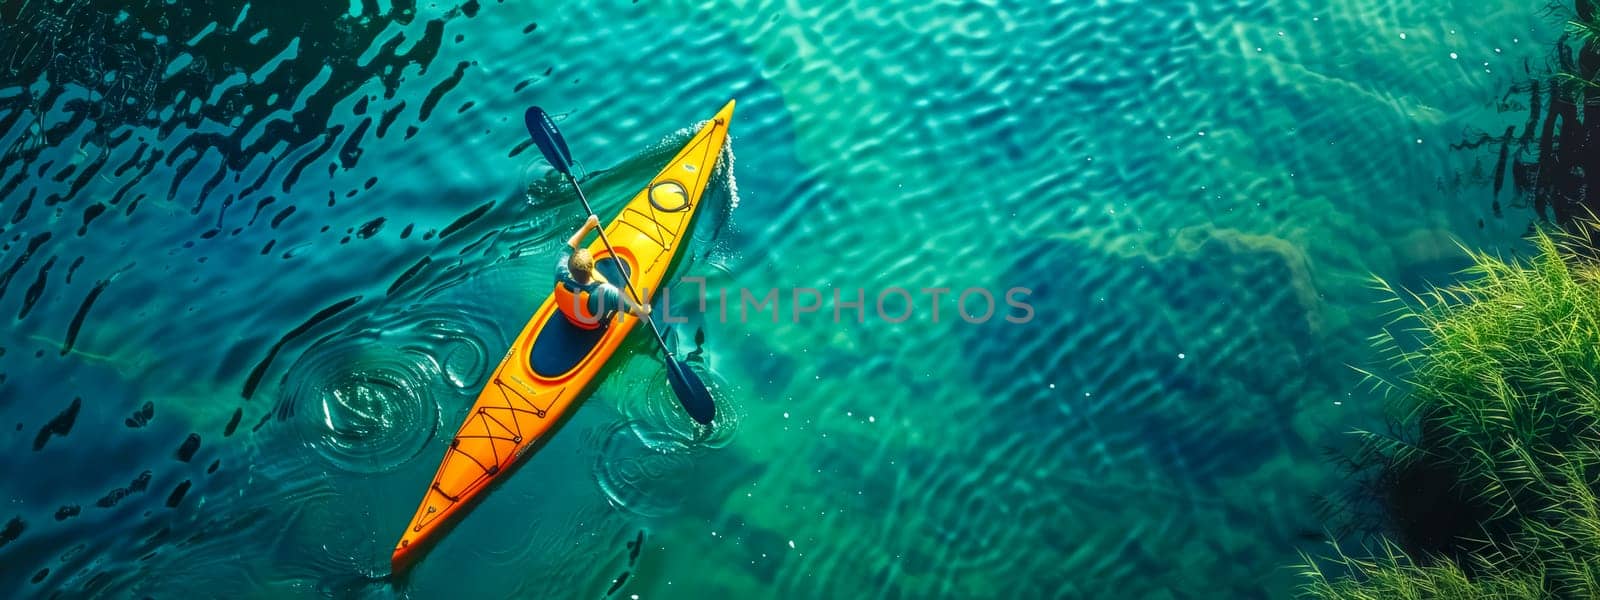 Aerial view of a person kayaking on a serene lake, surrounded by lush nature